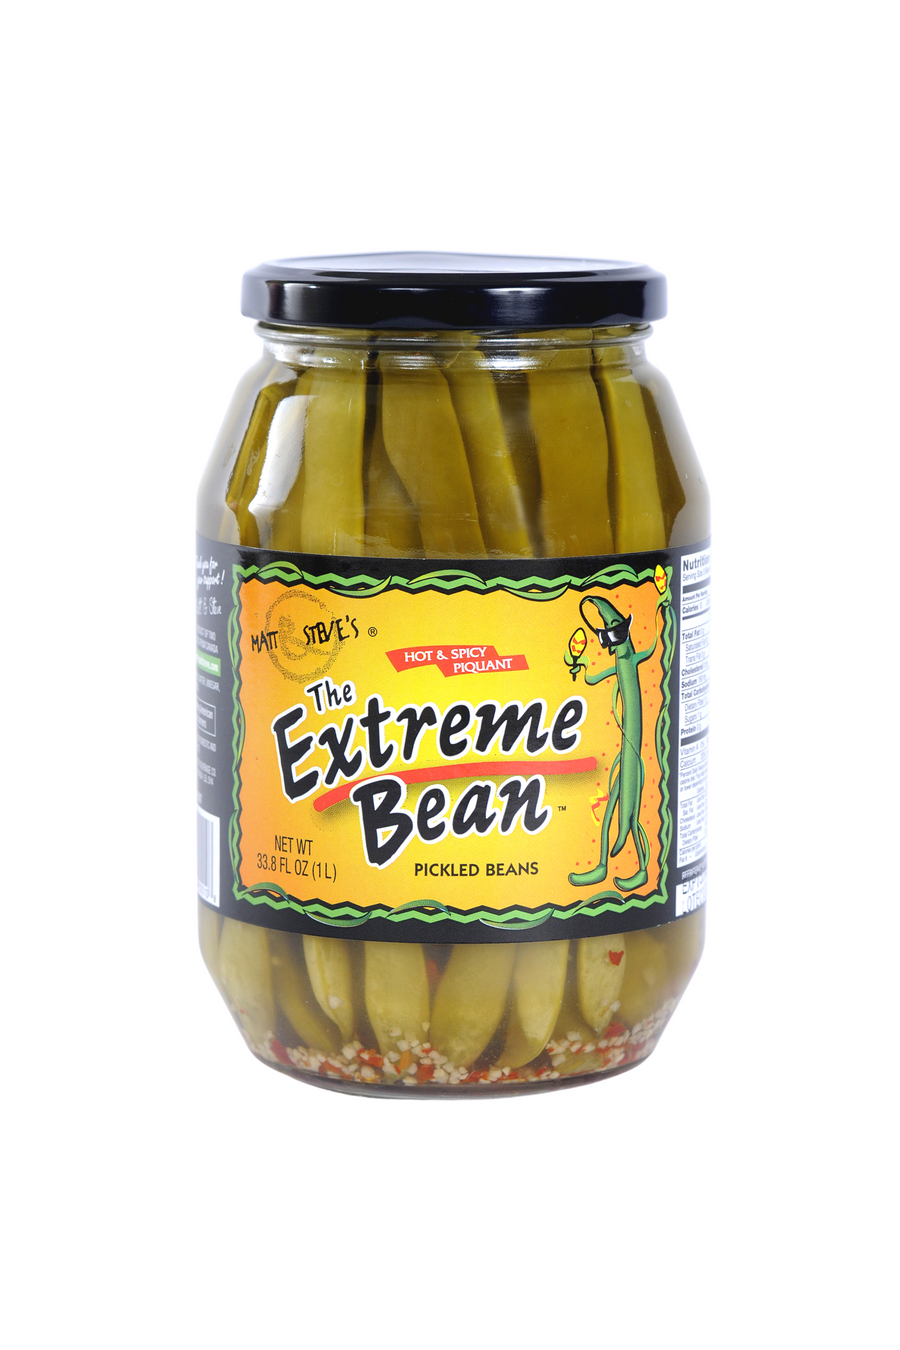 The Extreme Bean - Hot & Spicy 33 oz (3 pack)